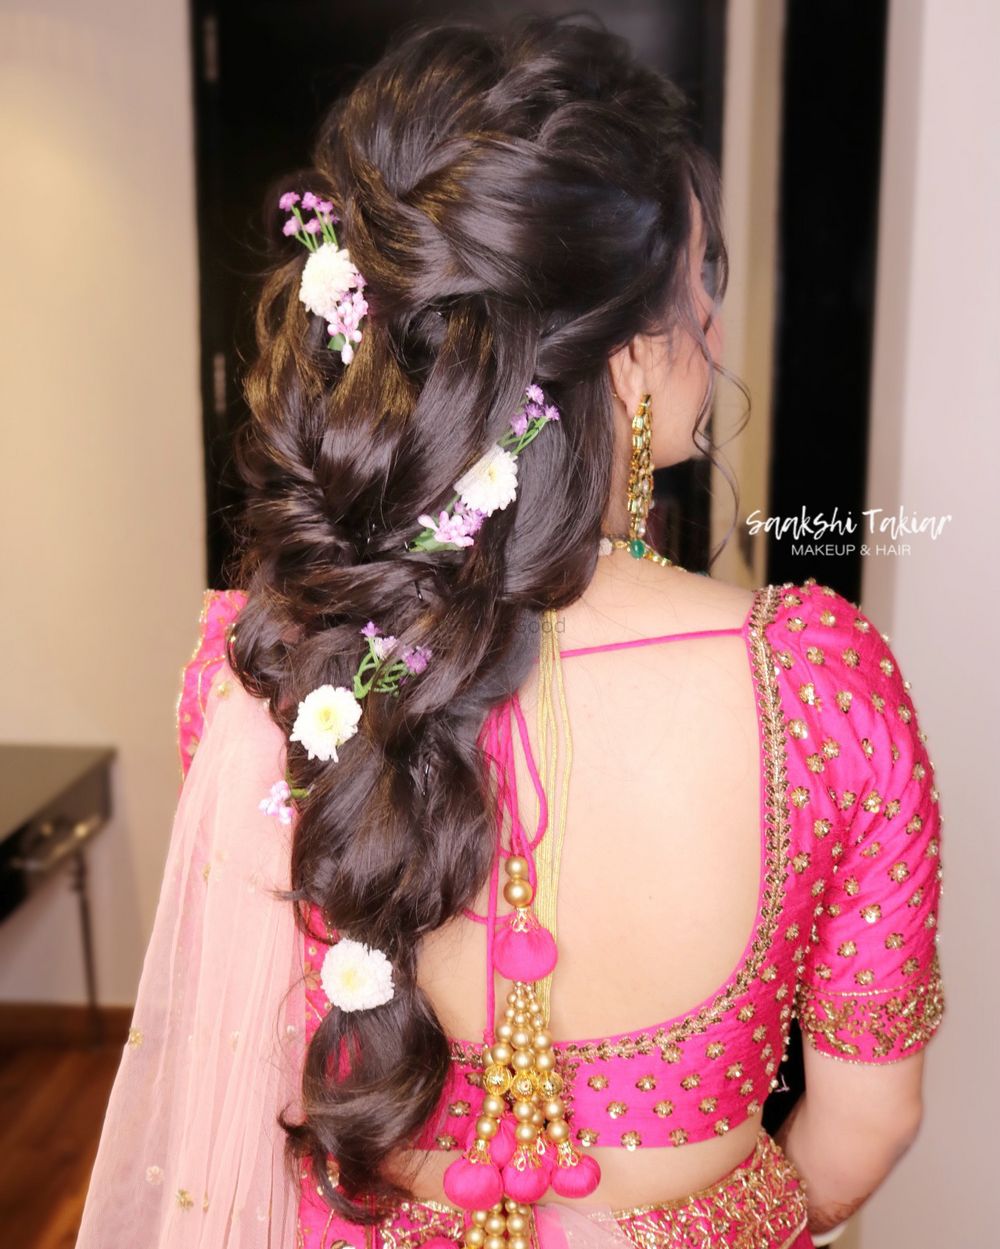 Photo From WMG: Hairstyles - By Makeup by Saakshi Takiar